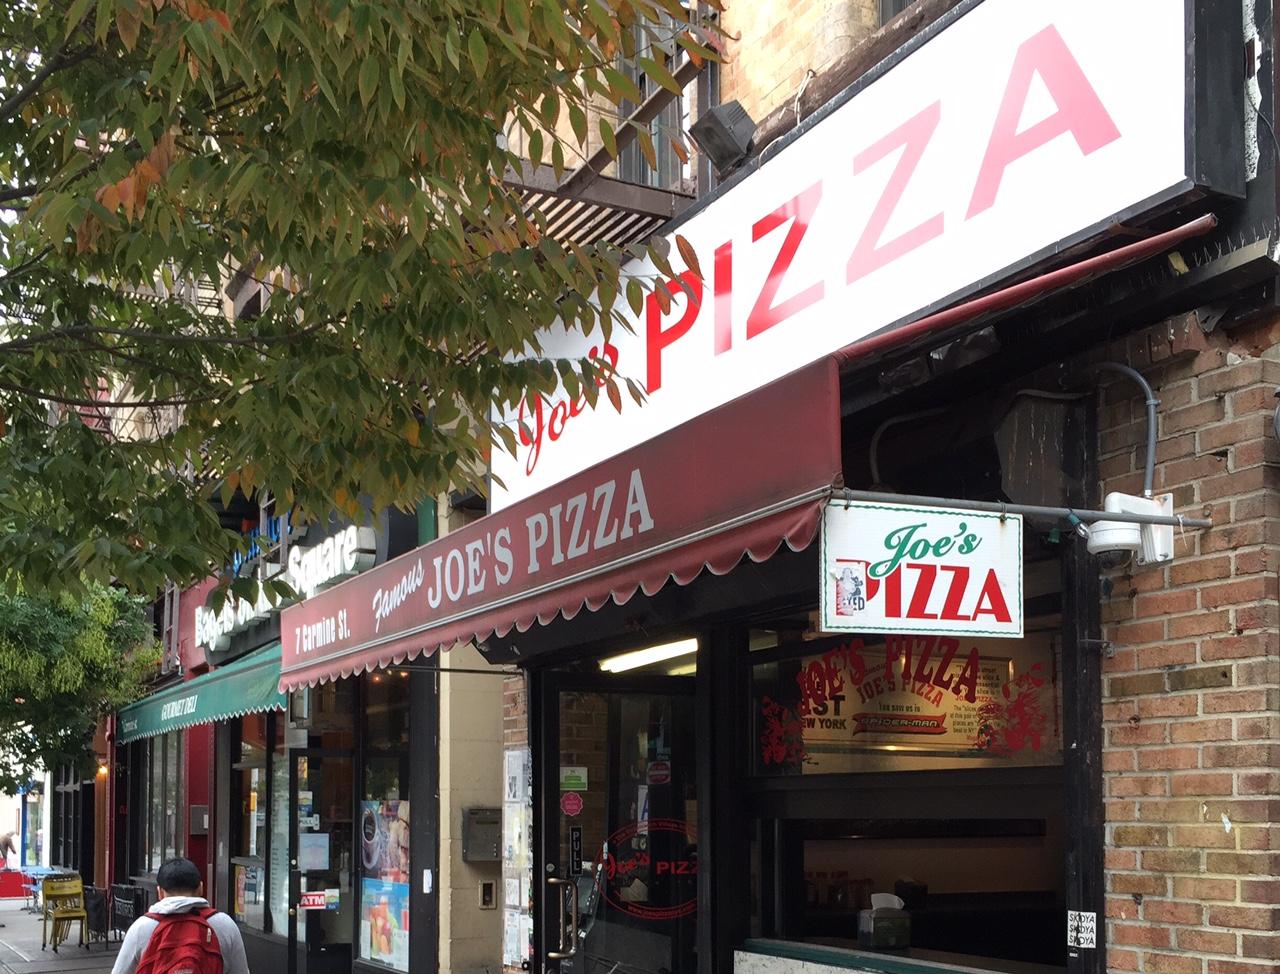 Cover image of this place Joe's Pizza